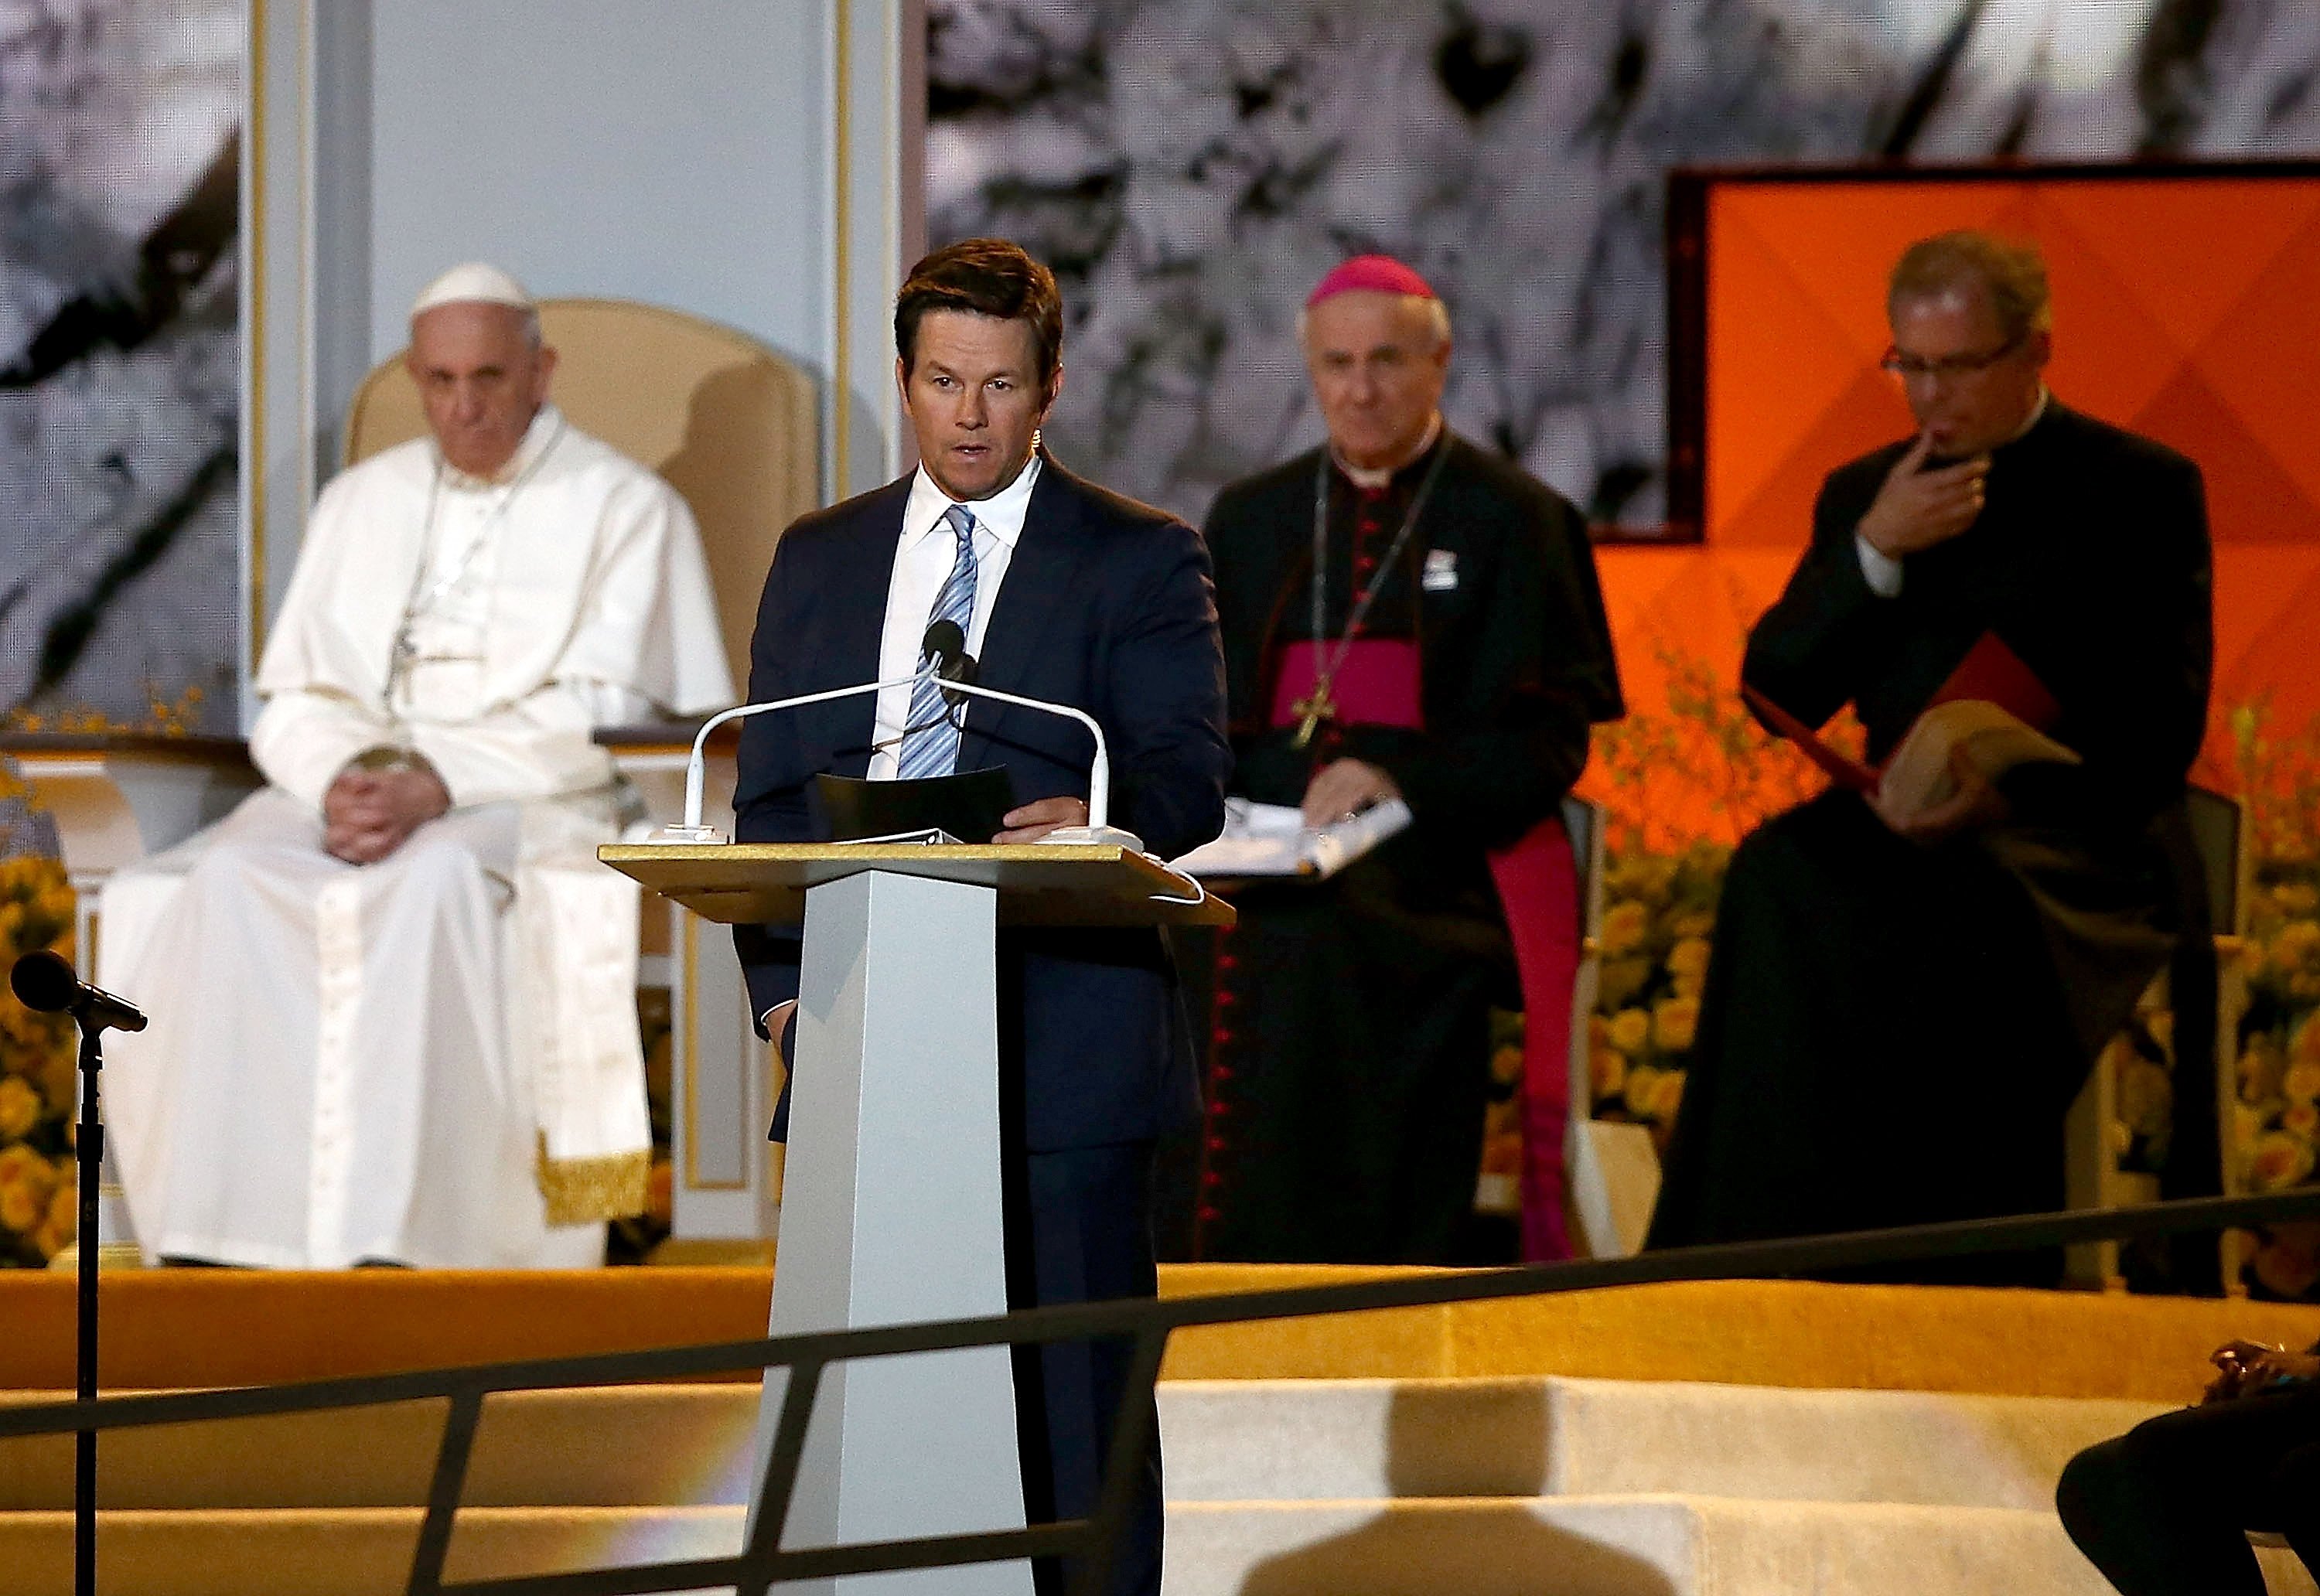 Actor Mark Wahlberg (C) speaks as Pope Francis (L) speaks during the Festival of Families on September 26, 2015 in Philadelphia, Pennsylvania. | Source: Getty Images